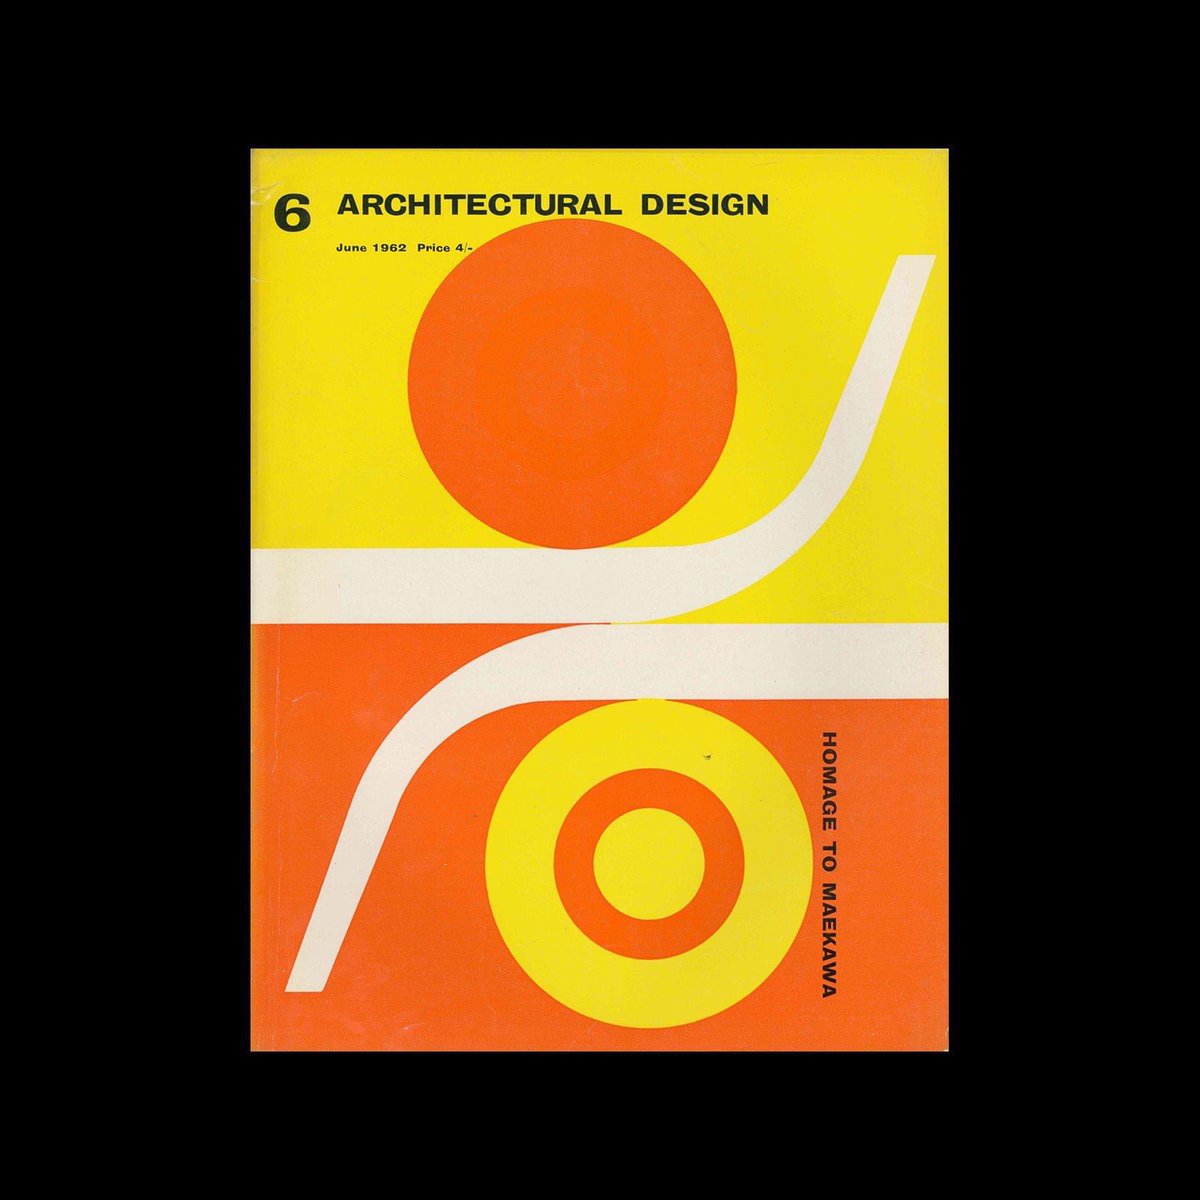 Architectural Design, June 1962. Cover design by Theo Crosby #theocrosby
designreviewed.com/artefacts/arch… #graphicdesign